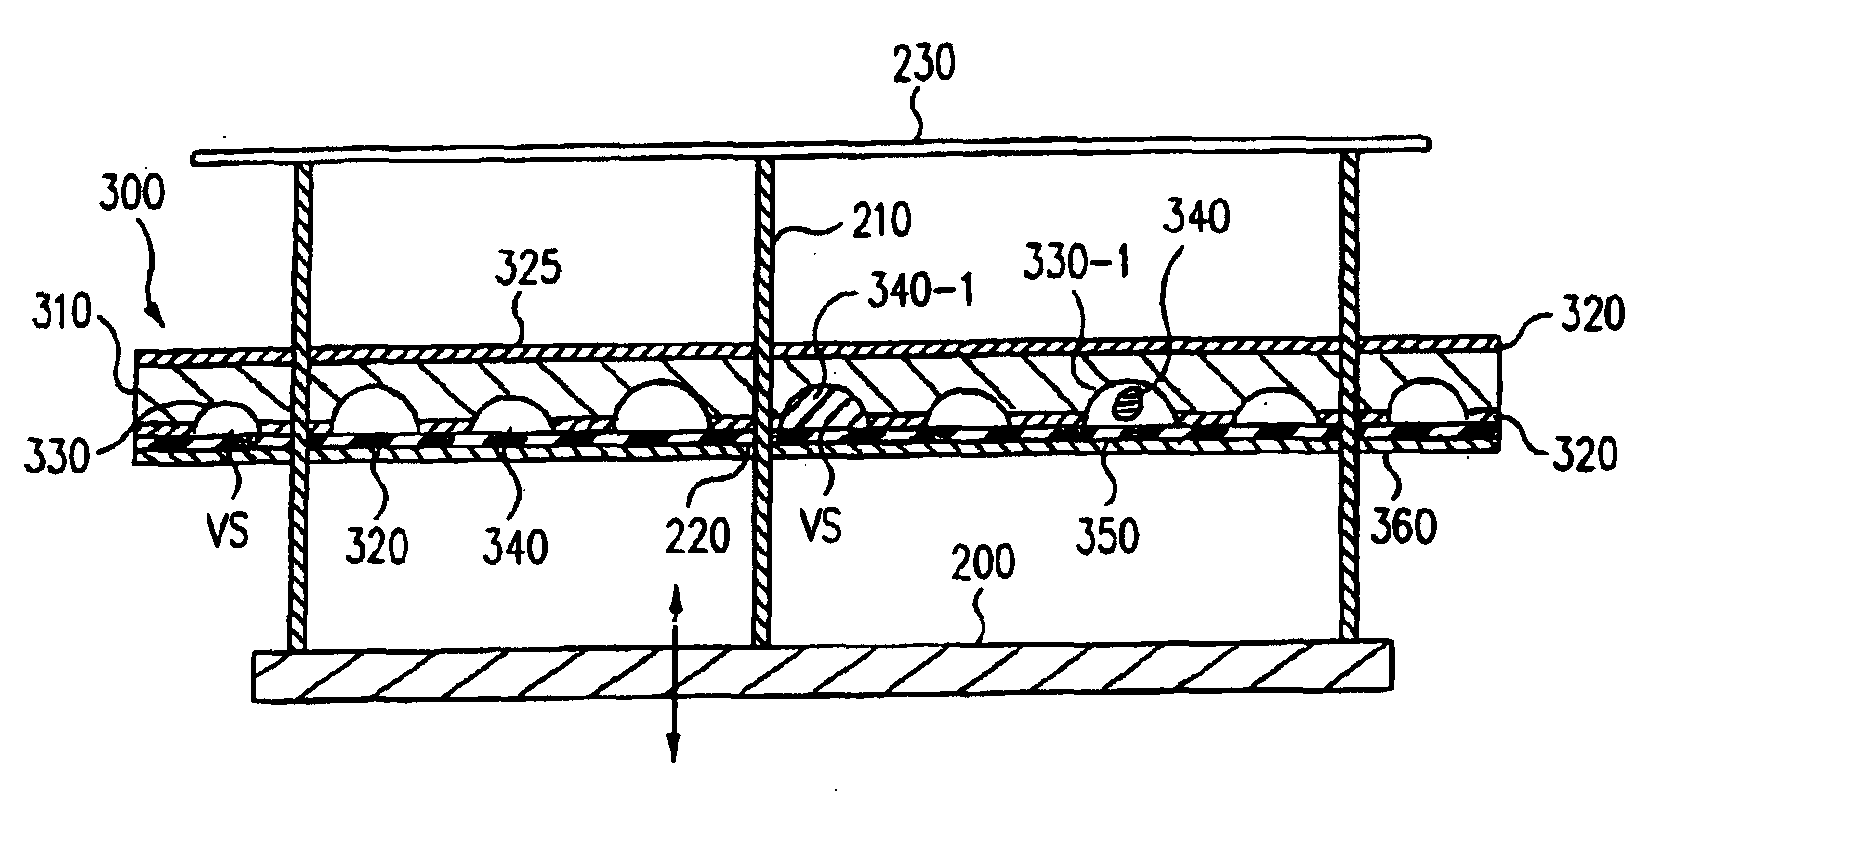 Integrally formed bake plate unit for use in wafer fabrication system